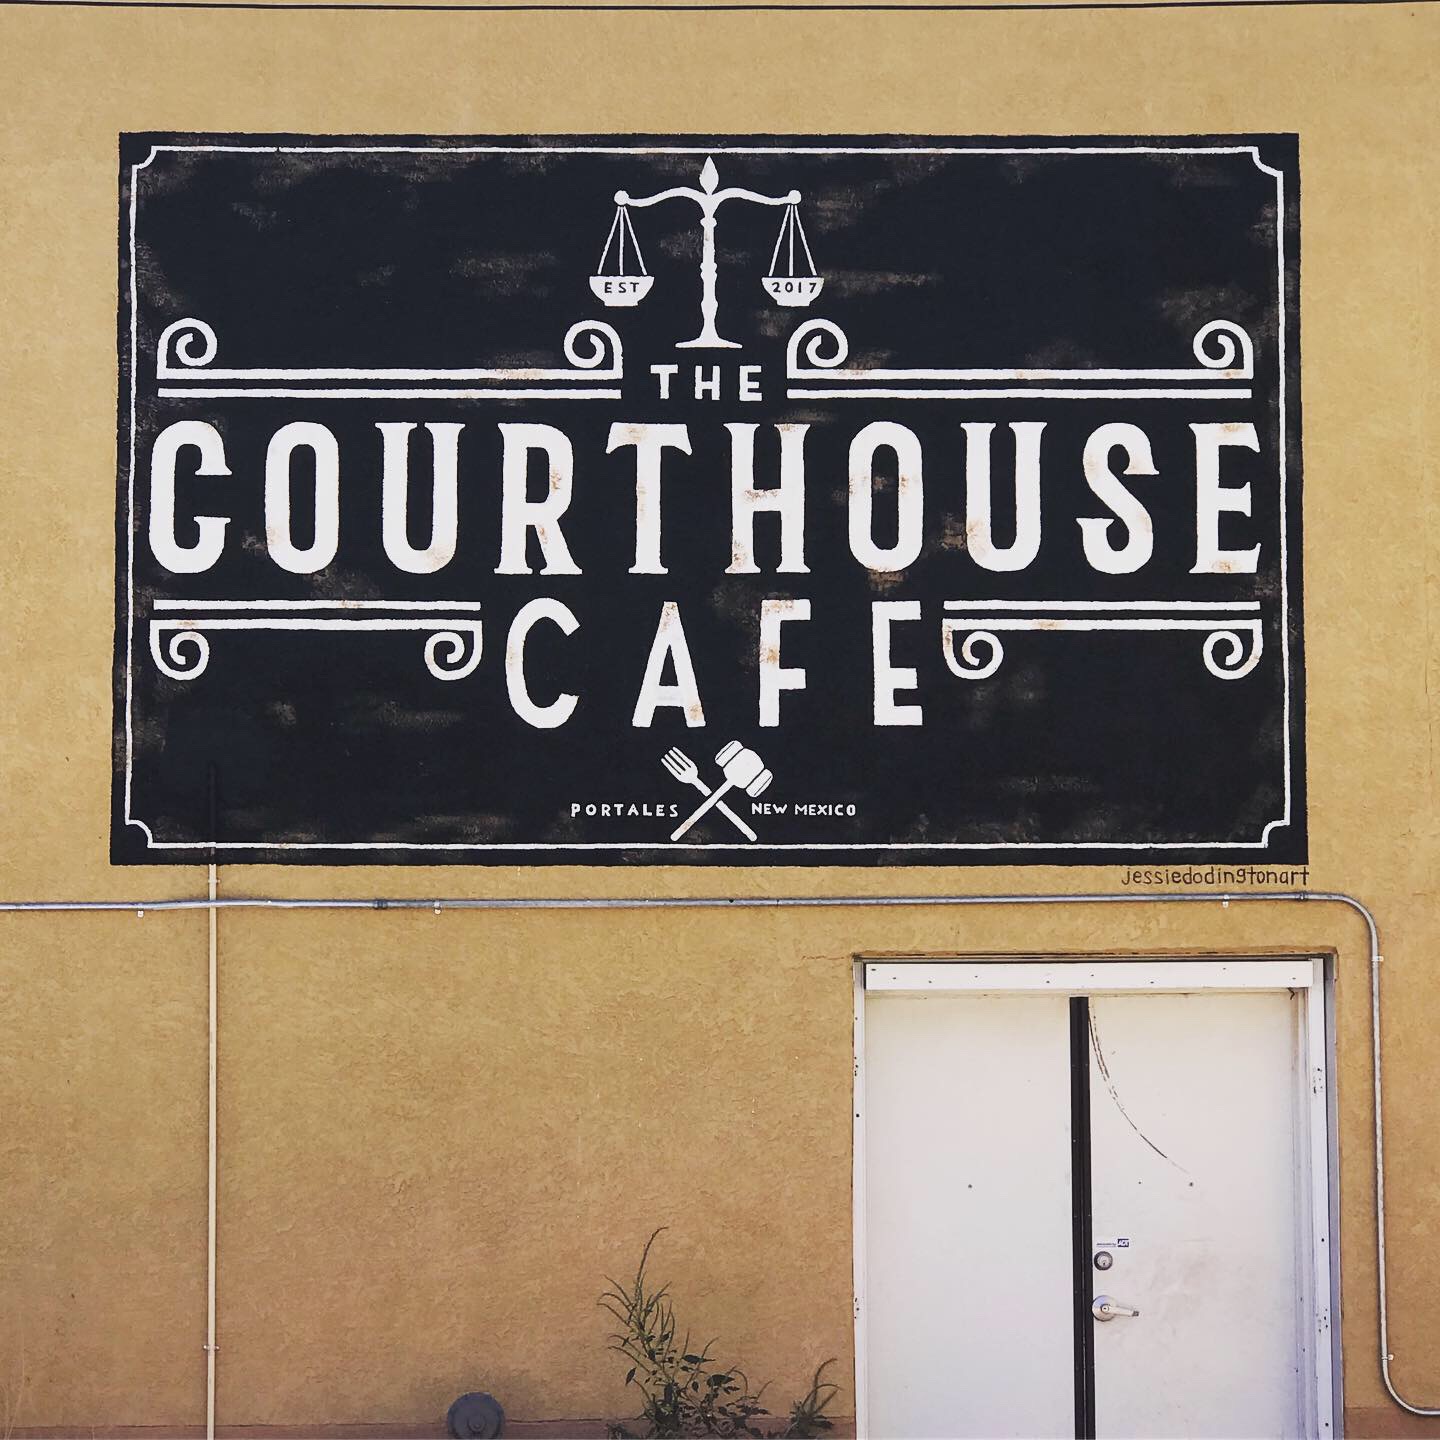 view of the back of the Courthouse Cafe in Portales, New Mexico